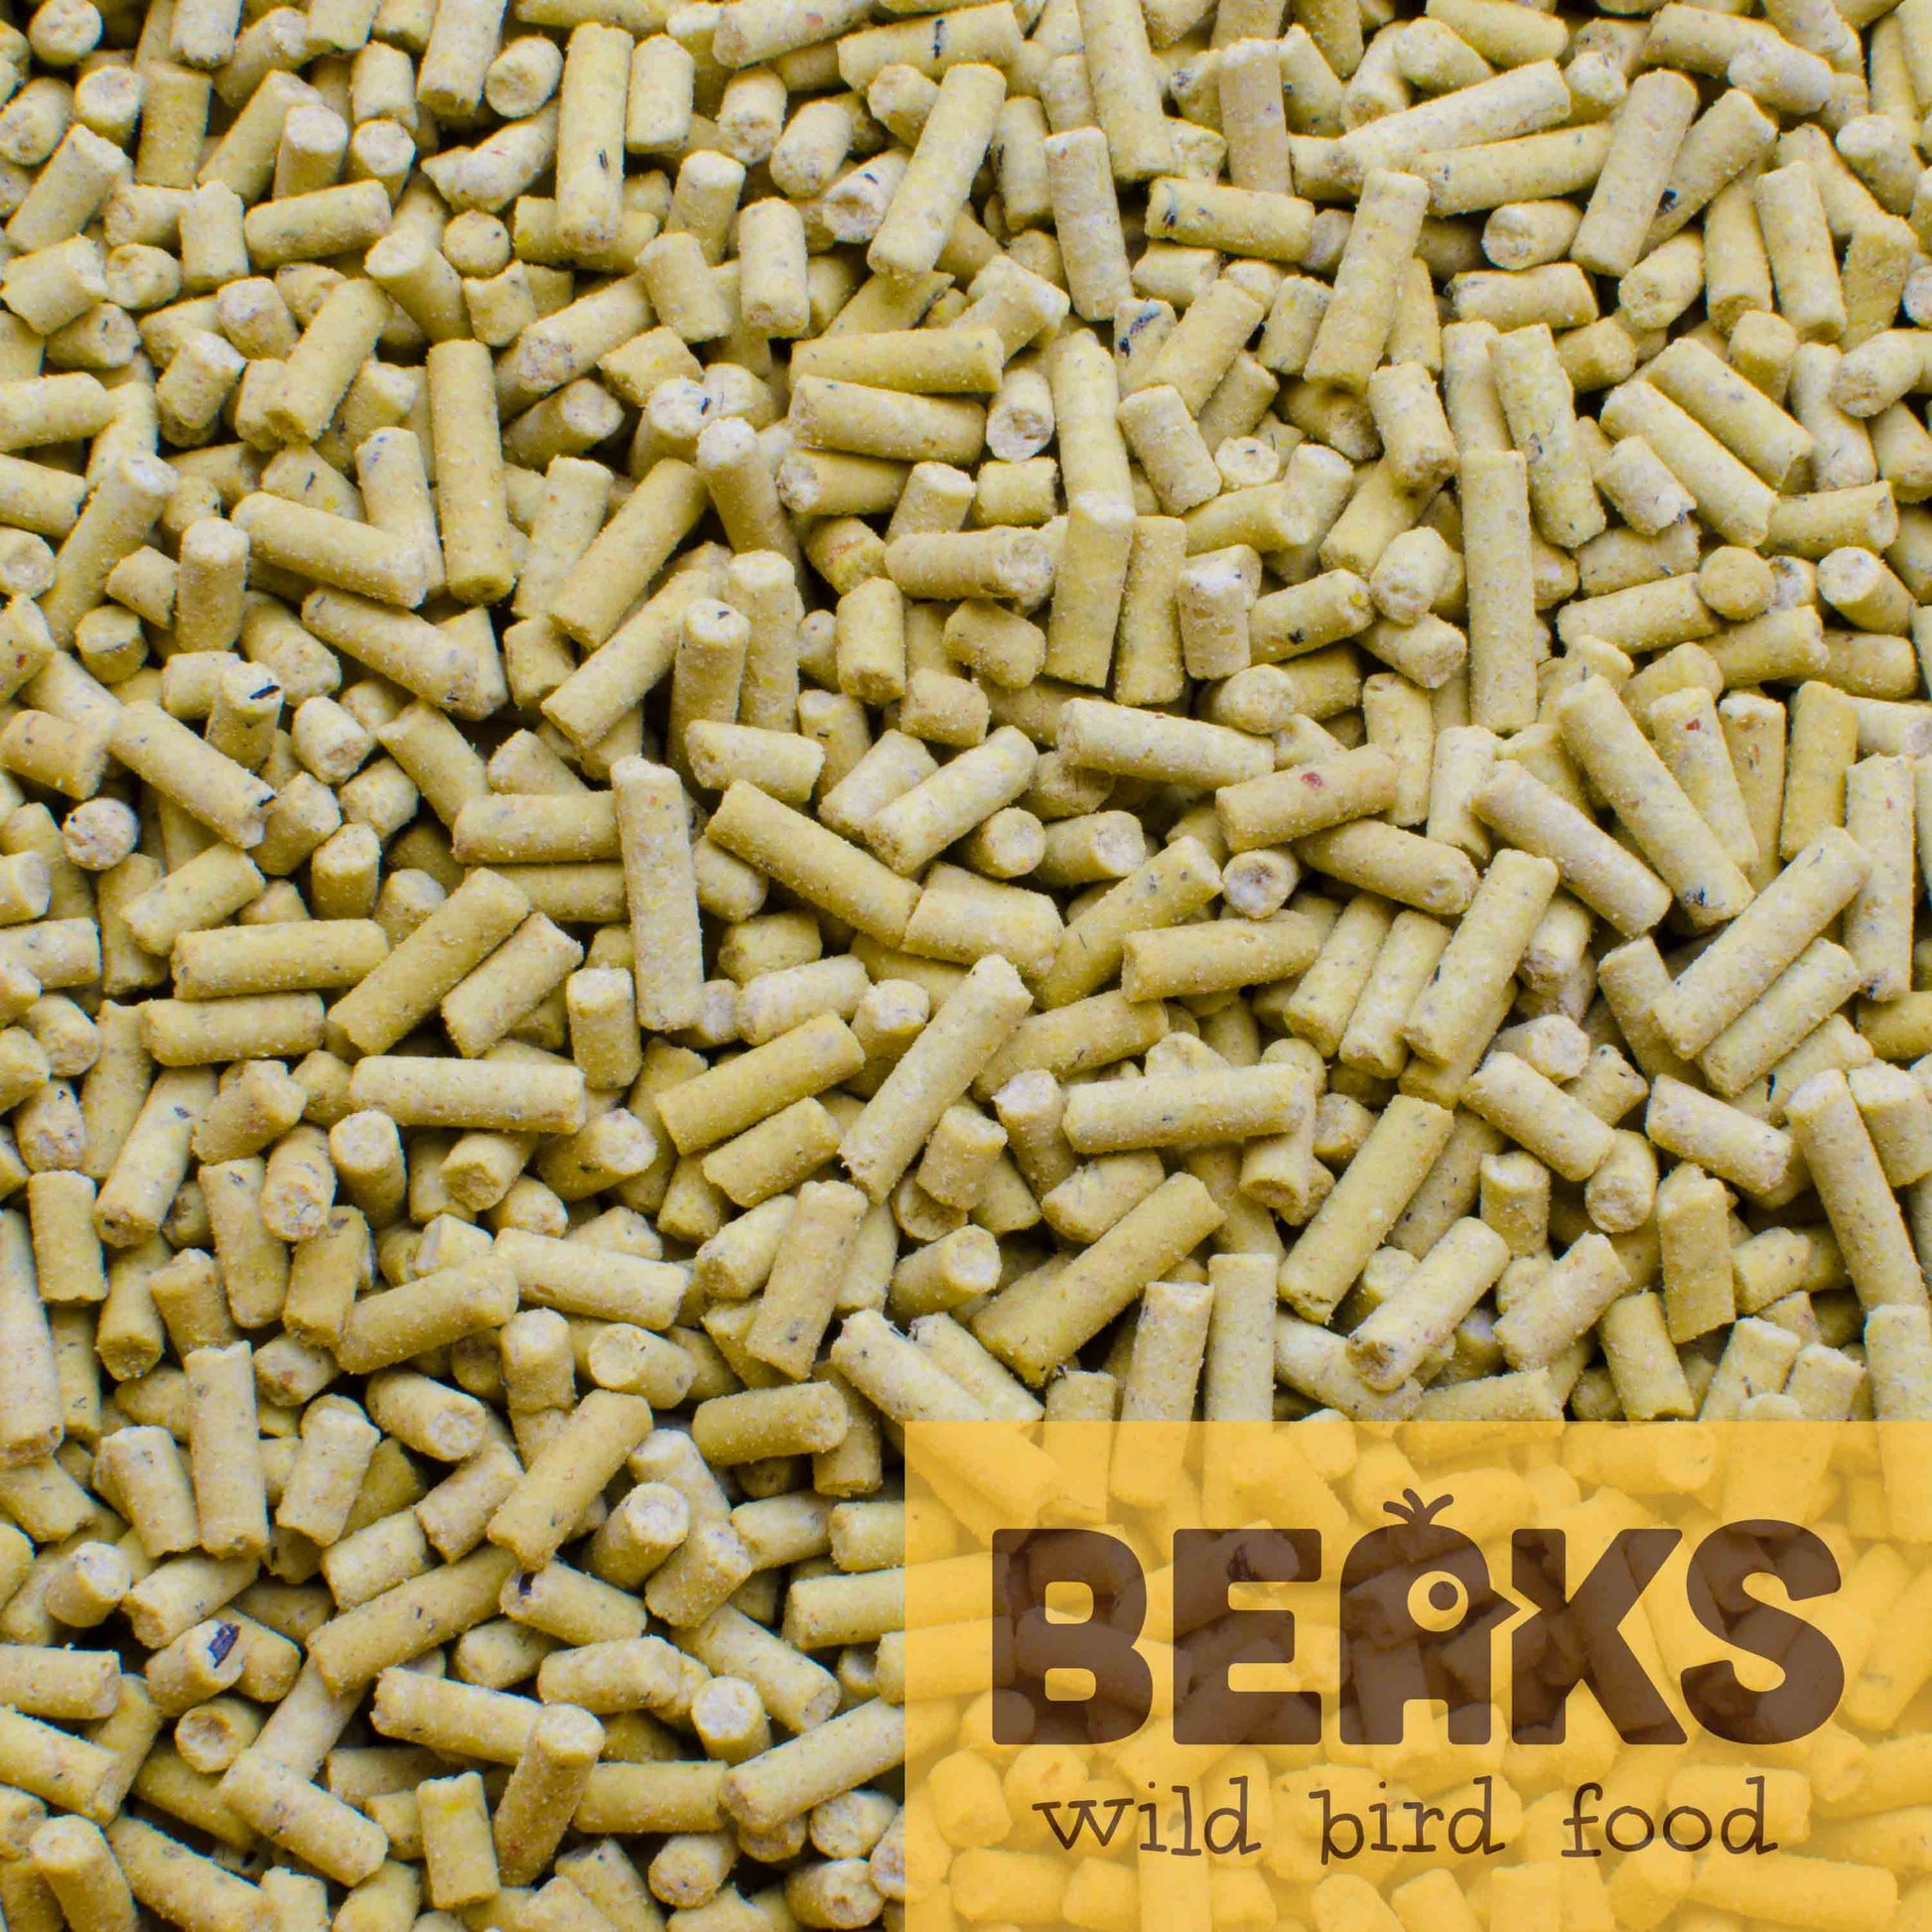 12.75kg INSECT suet feed pellets